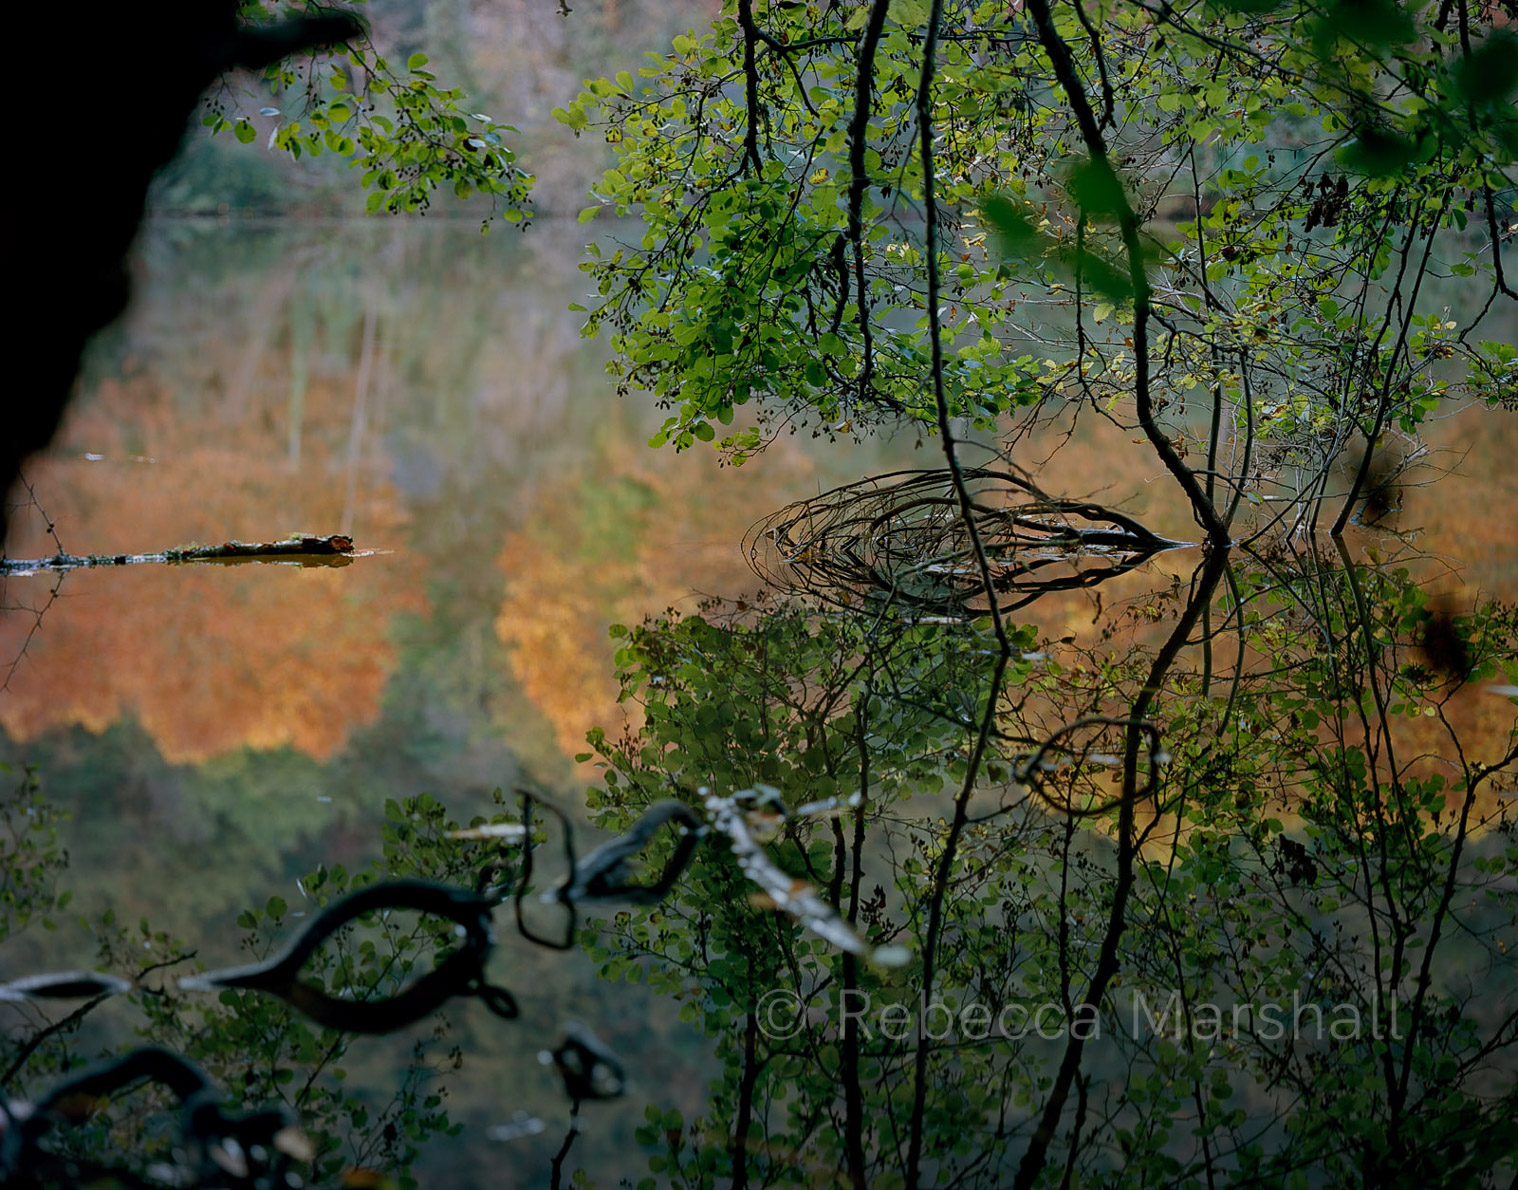 Photograph of trees and roots in a slow-moving river in the woods, with orange leaves reflected in the water